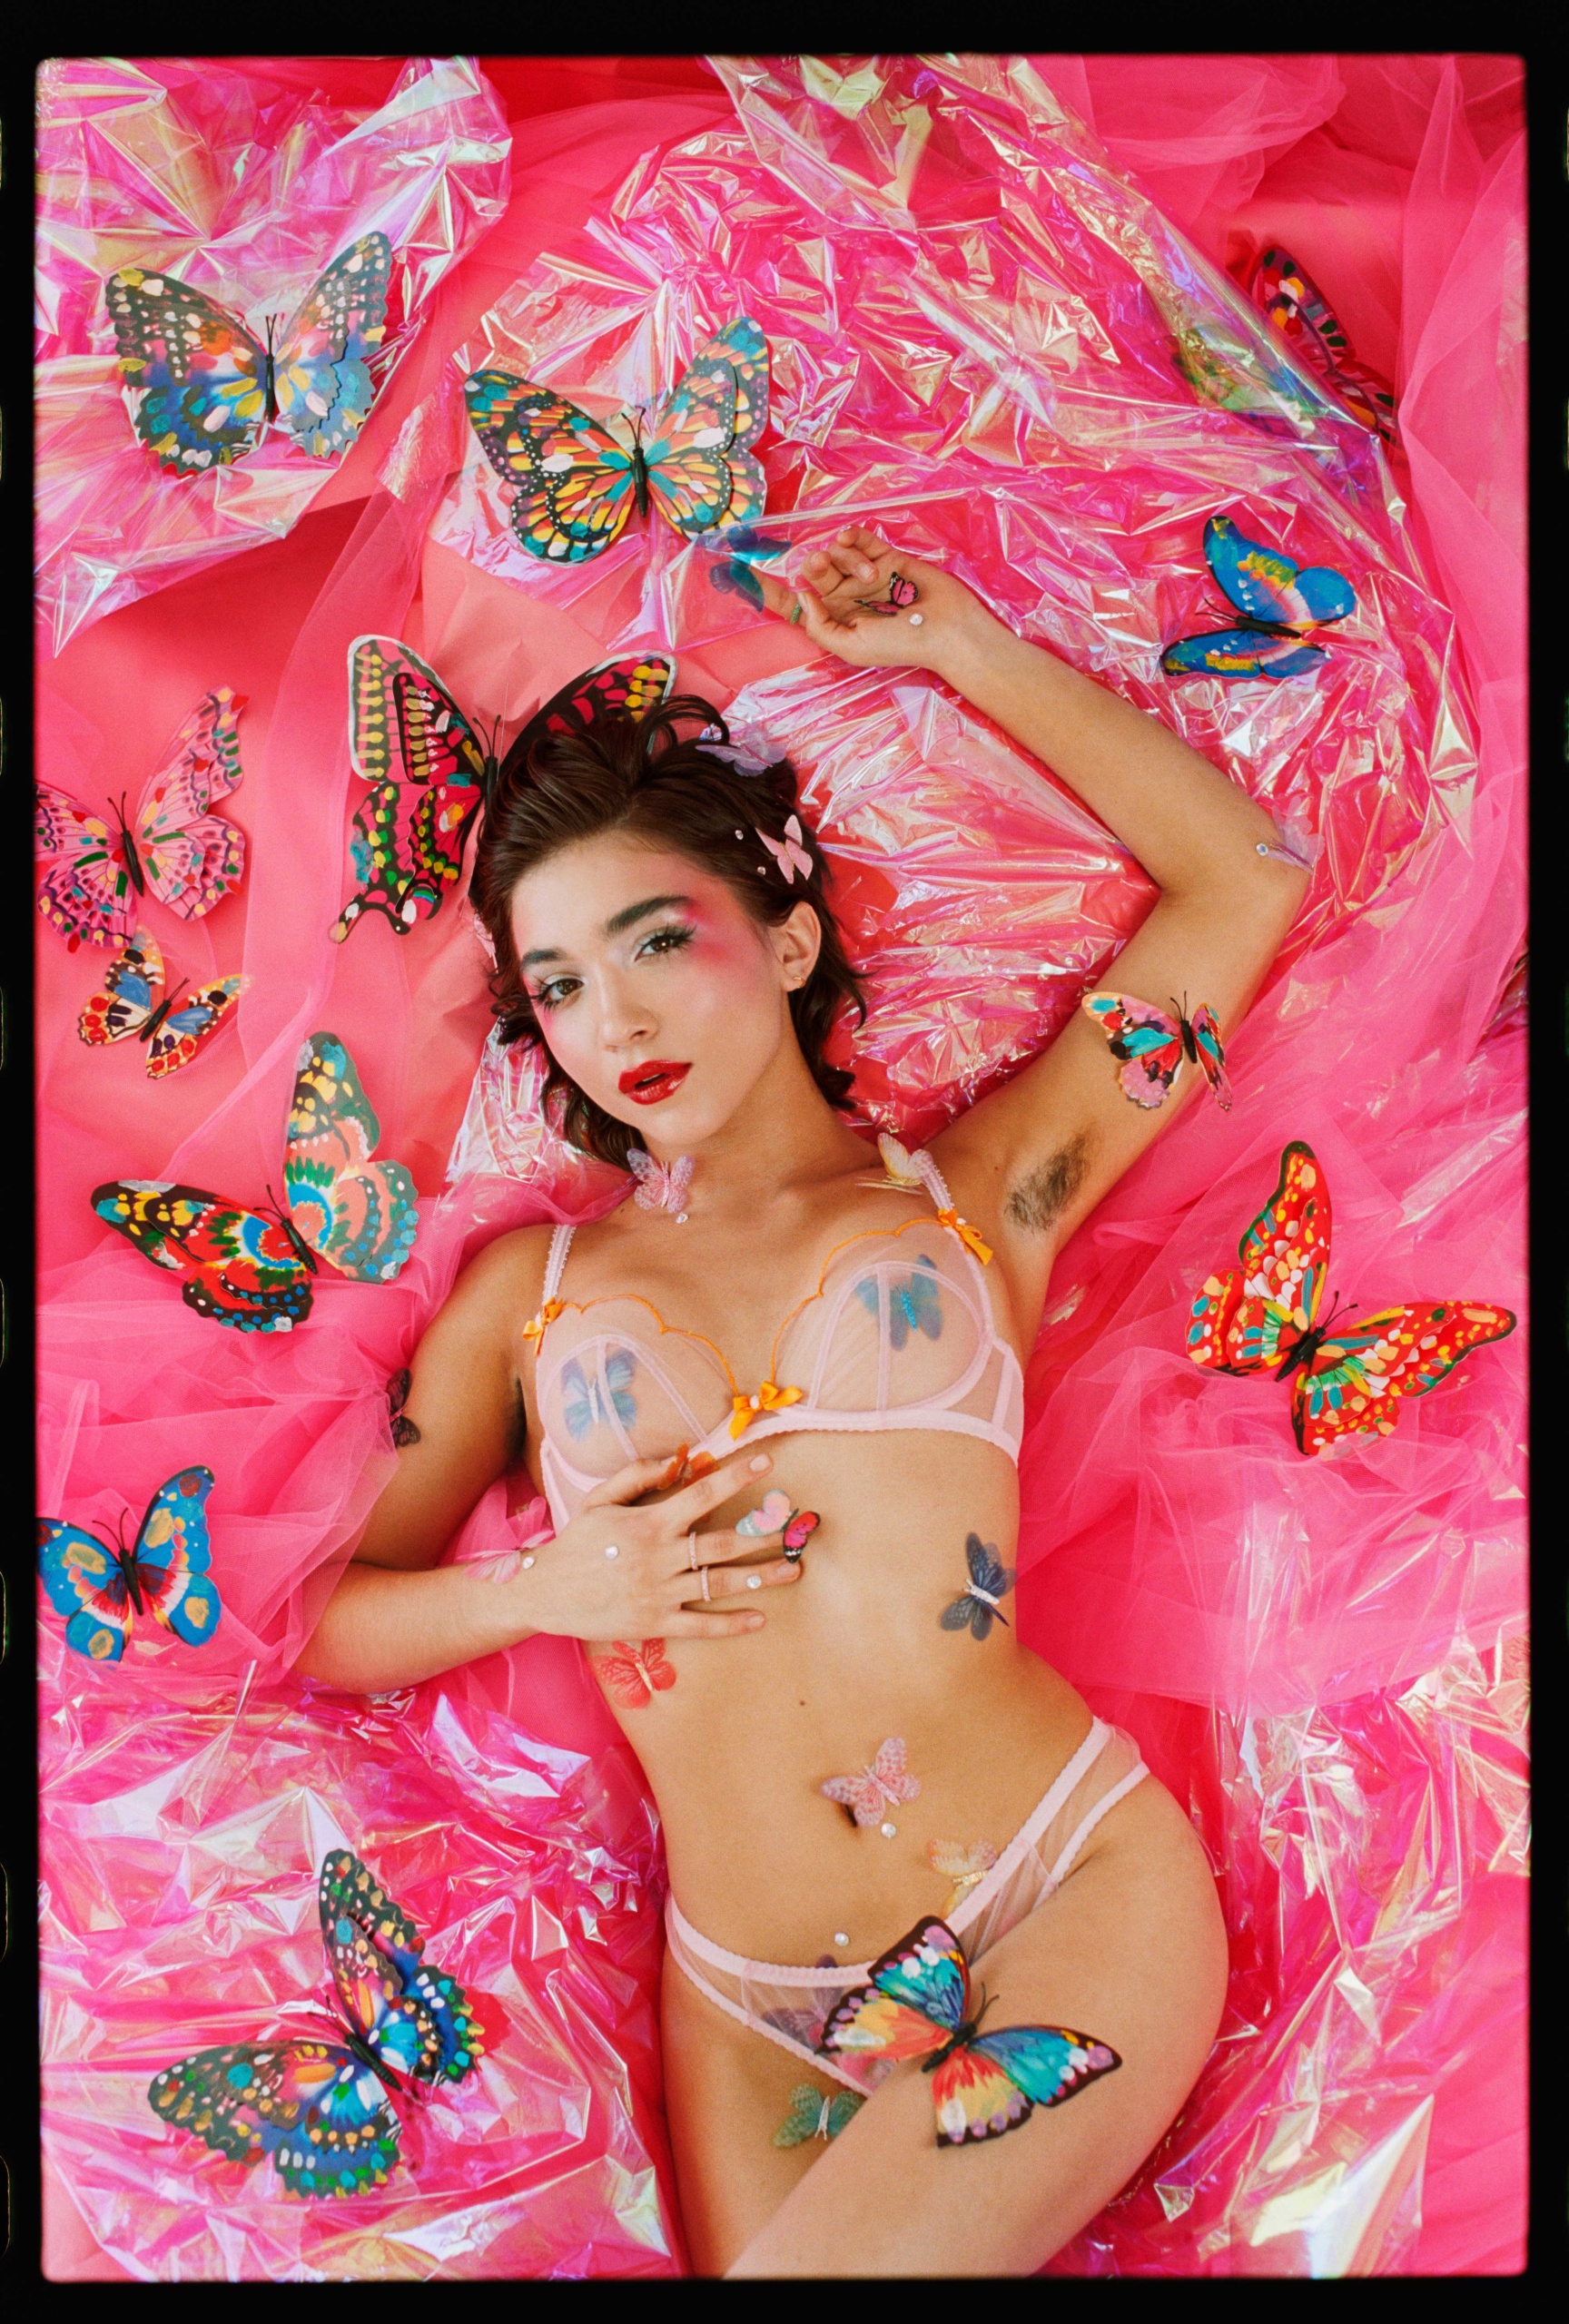 Rowan Blanchard. Photography by Alia Penner. Styled by Chris Horan. Makeup by Dana Delaney. Hair by Clayton Hawkins. Agent Provocateur lingerie Eriness rings.